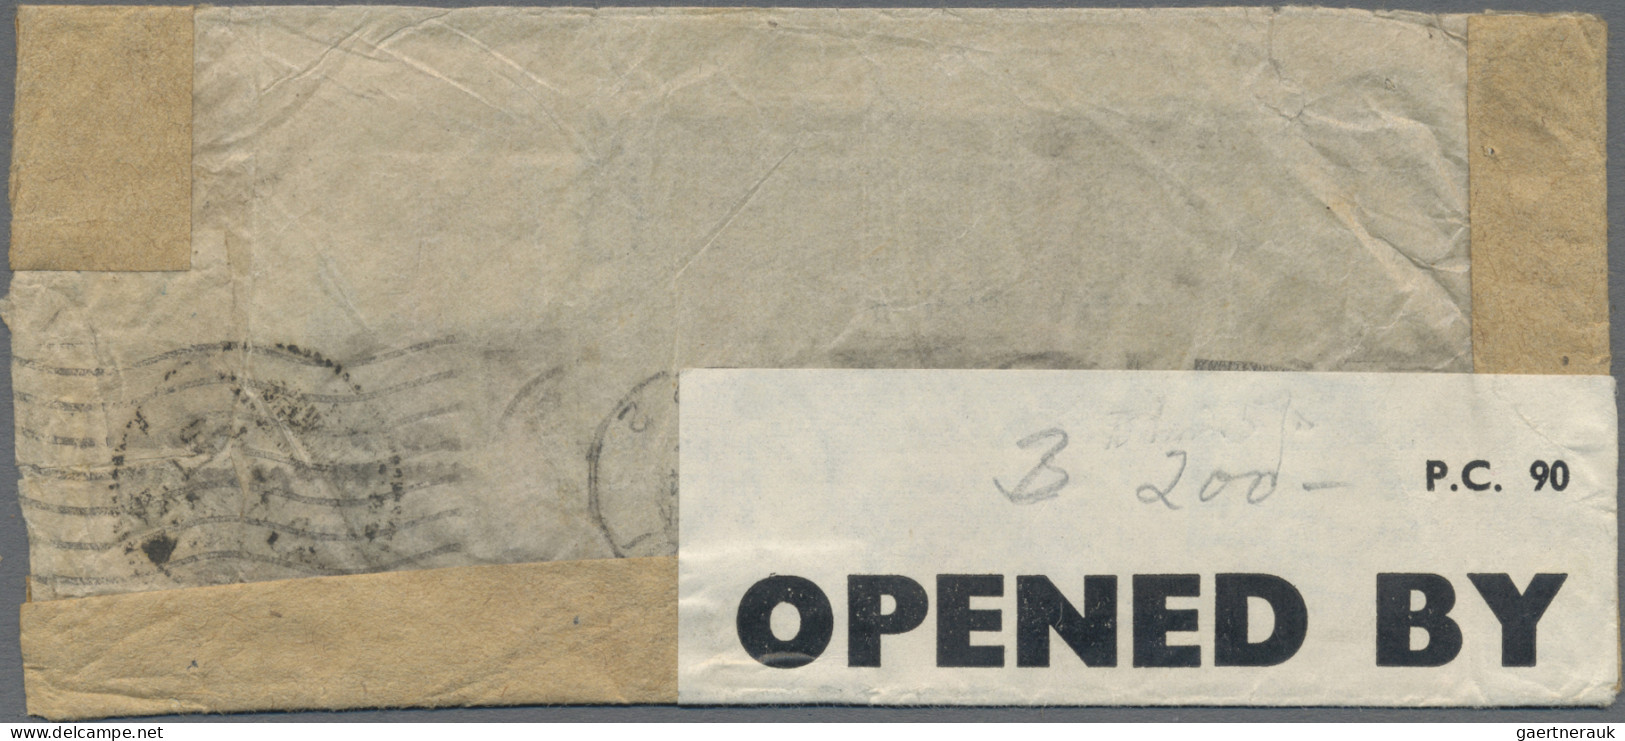 China: 1942/45, Airmail Cover Addressed To London, England Bearing SYS Central T - Lettres & Documents